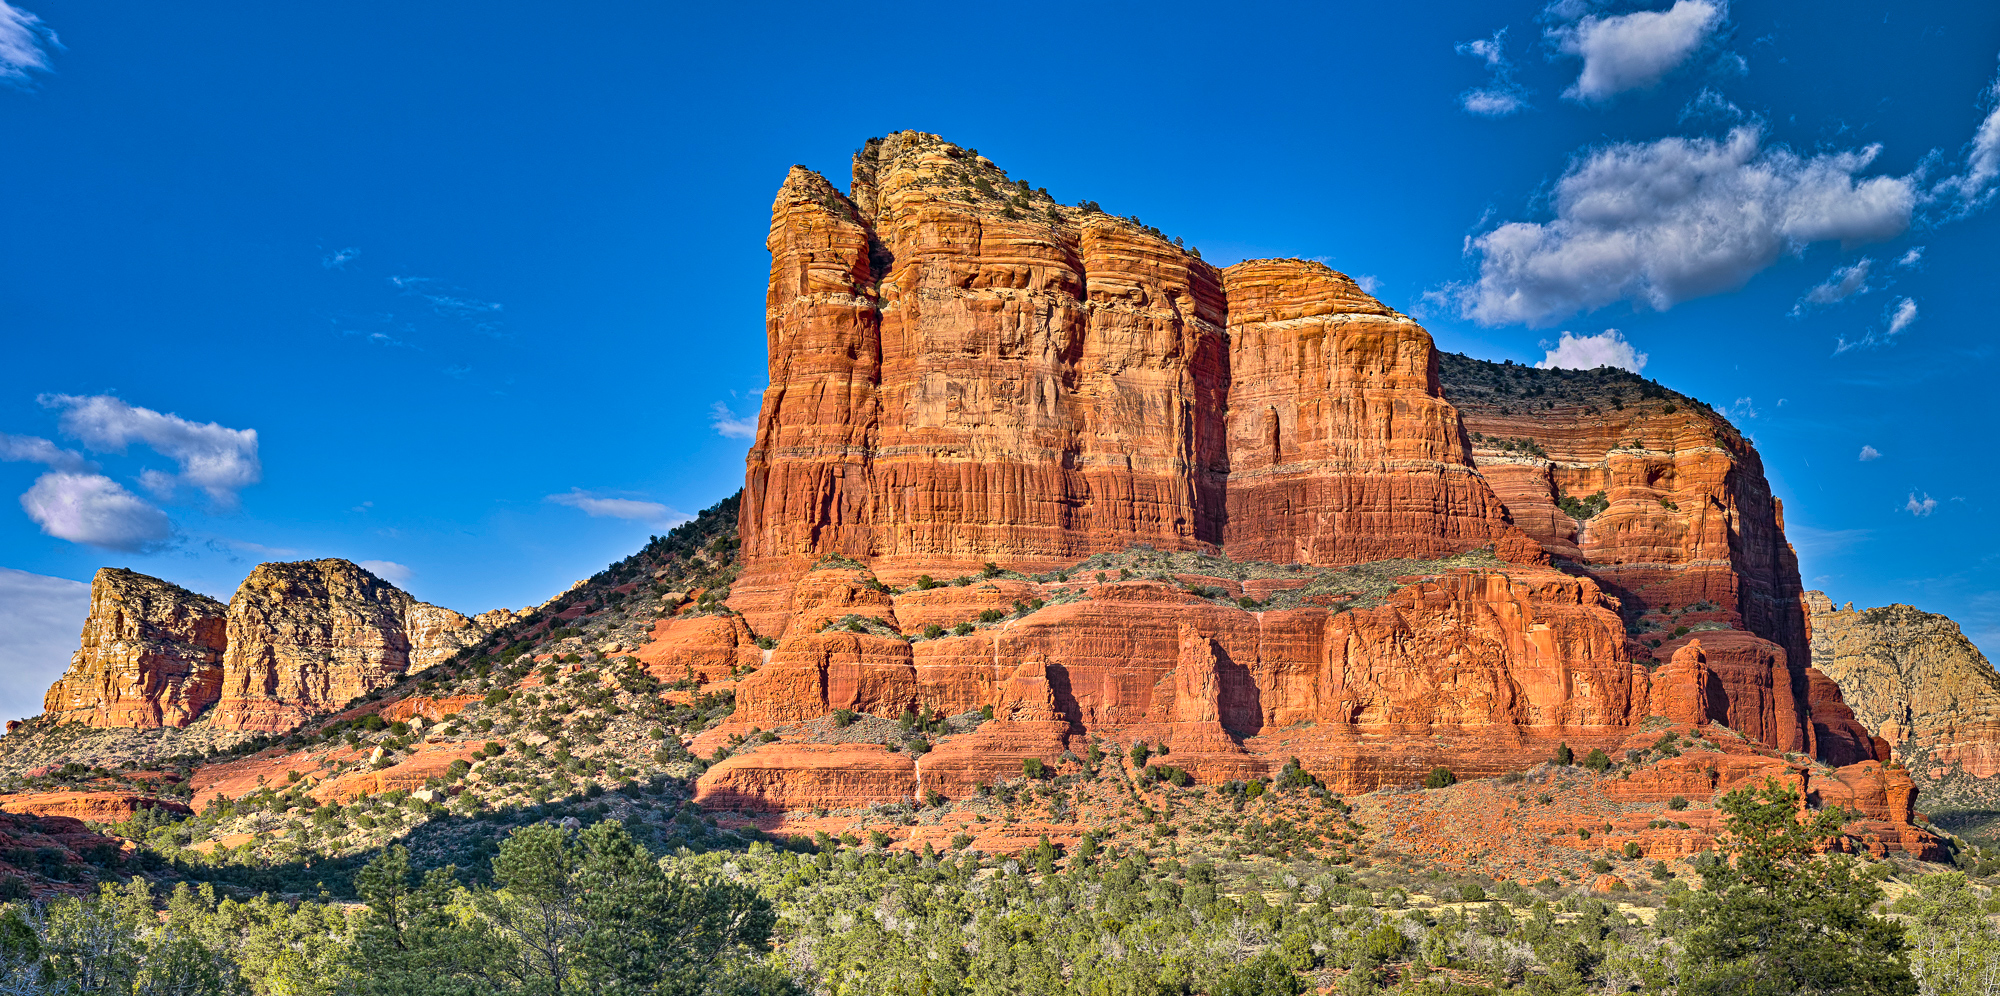 Courthouse Rock, 2014; Sigma DP3 M & 50mm, +.3 EV, ISO 100